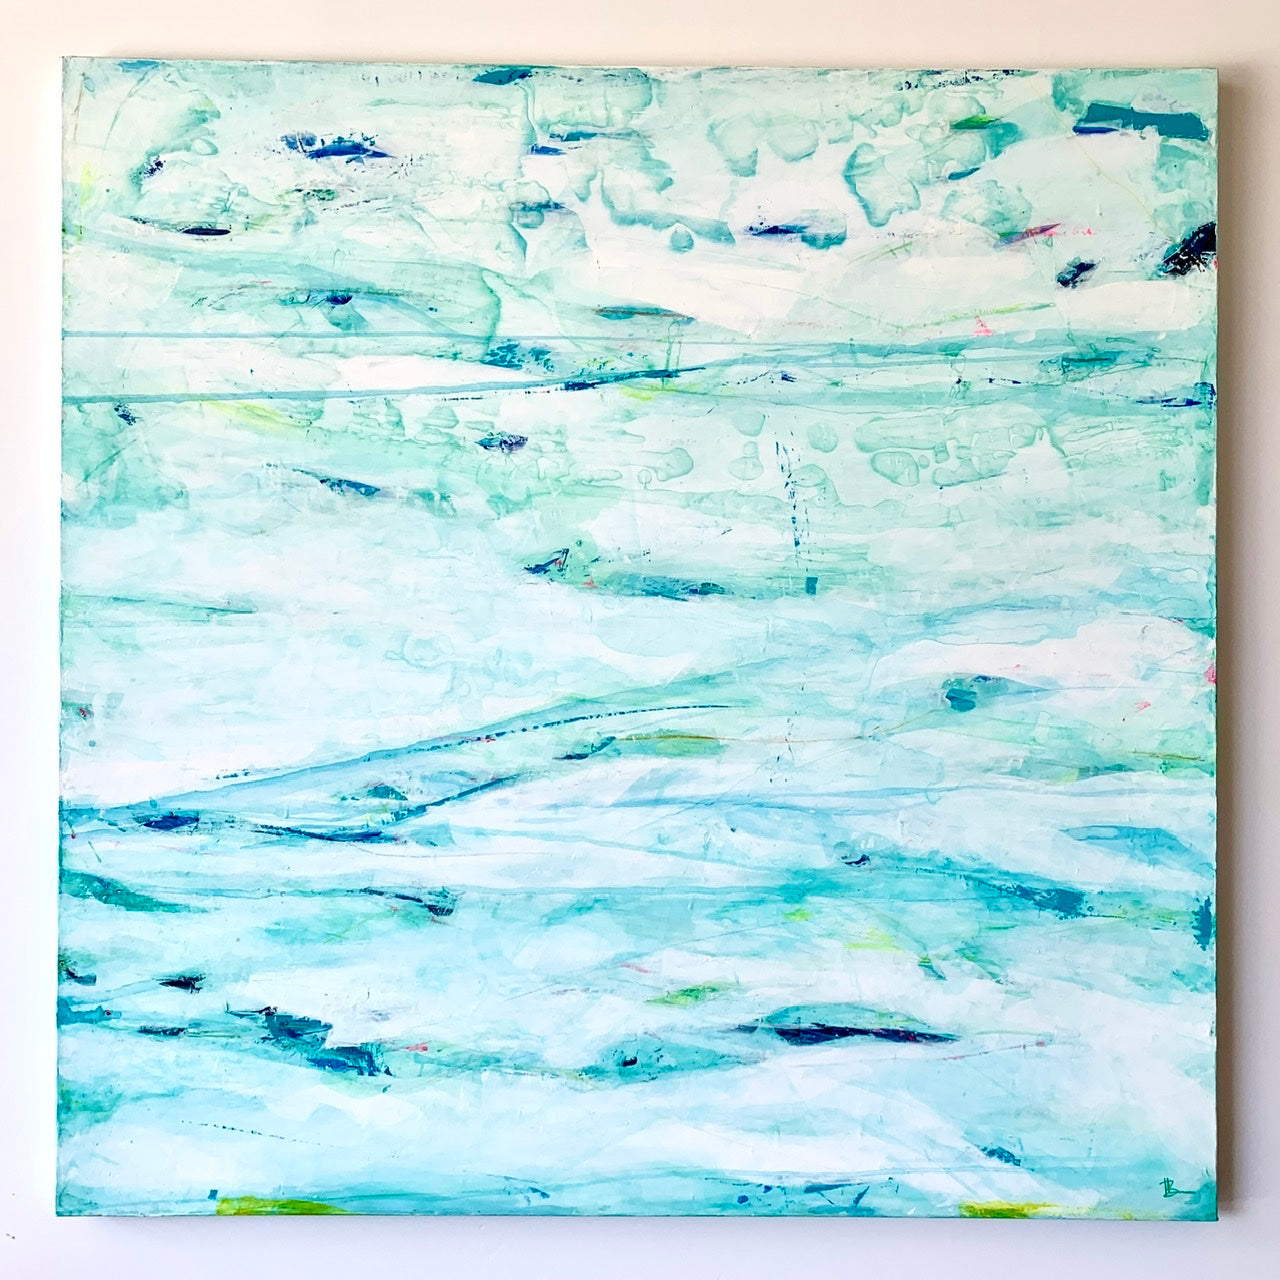 Dive In - 48 x 48